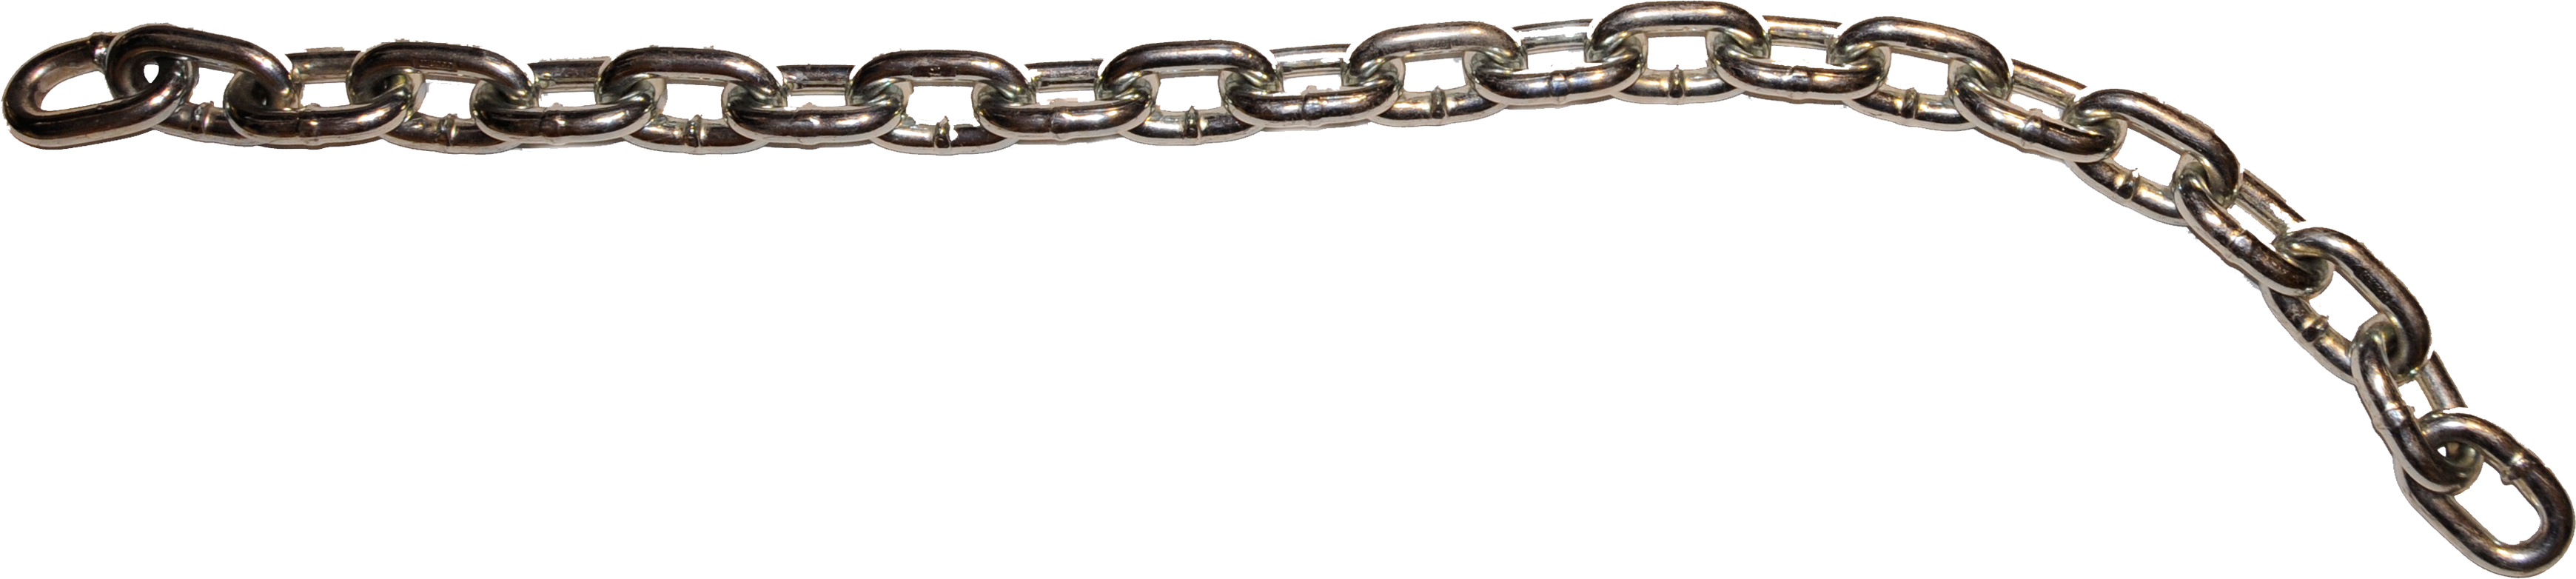 Chain PNG - 25215